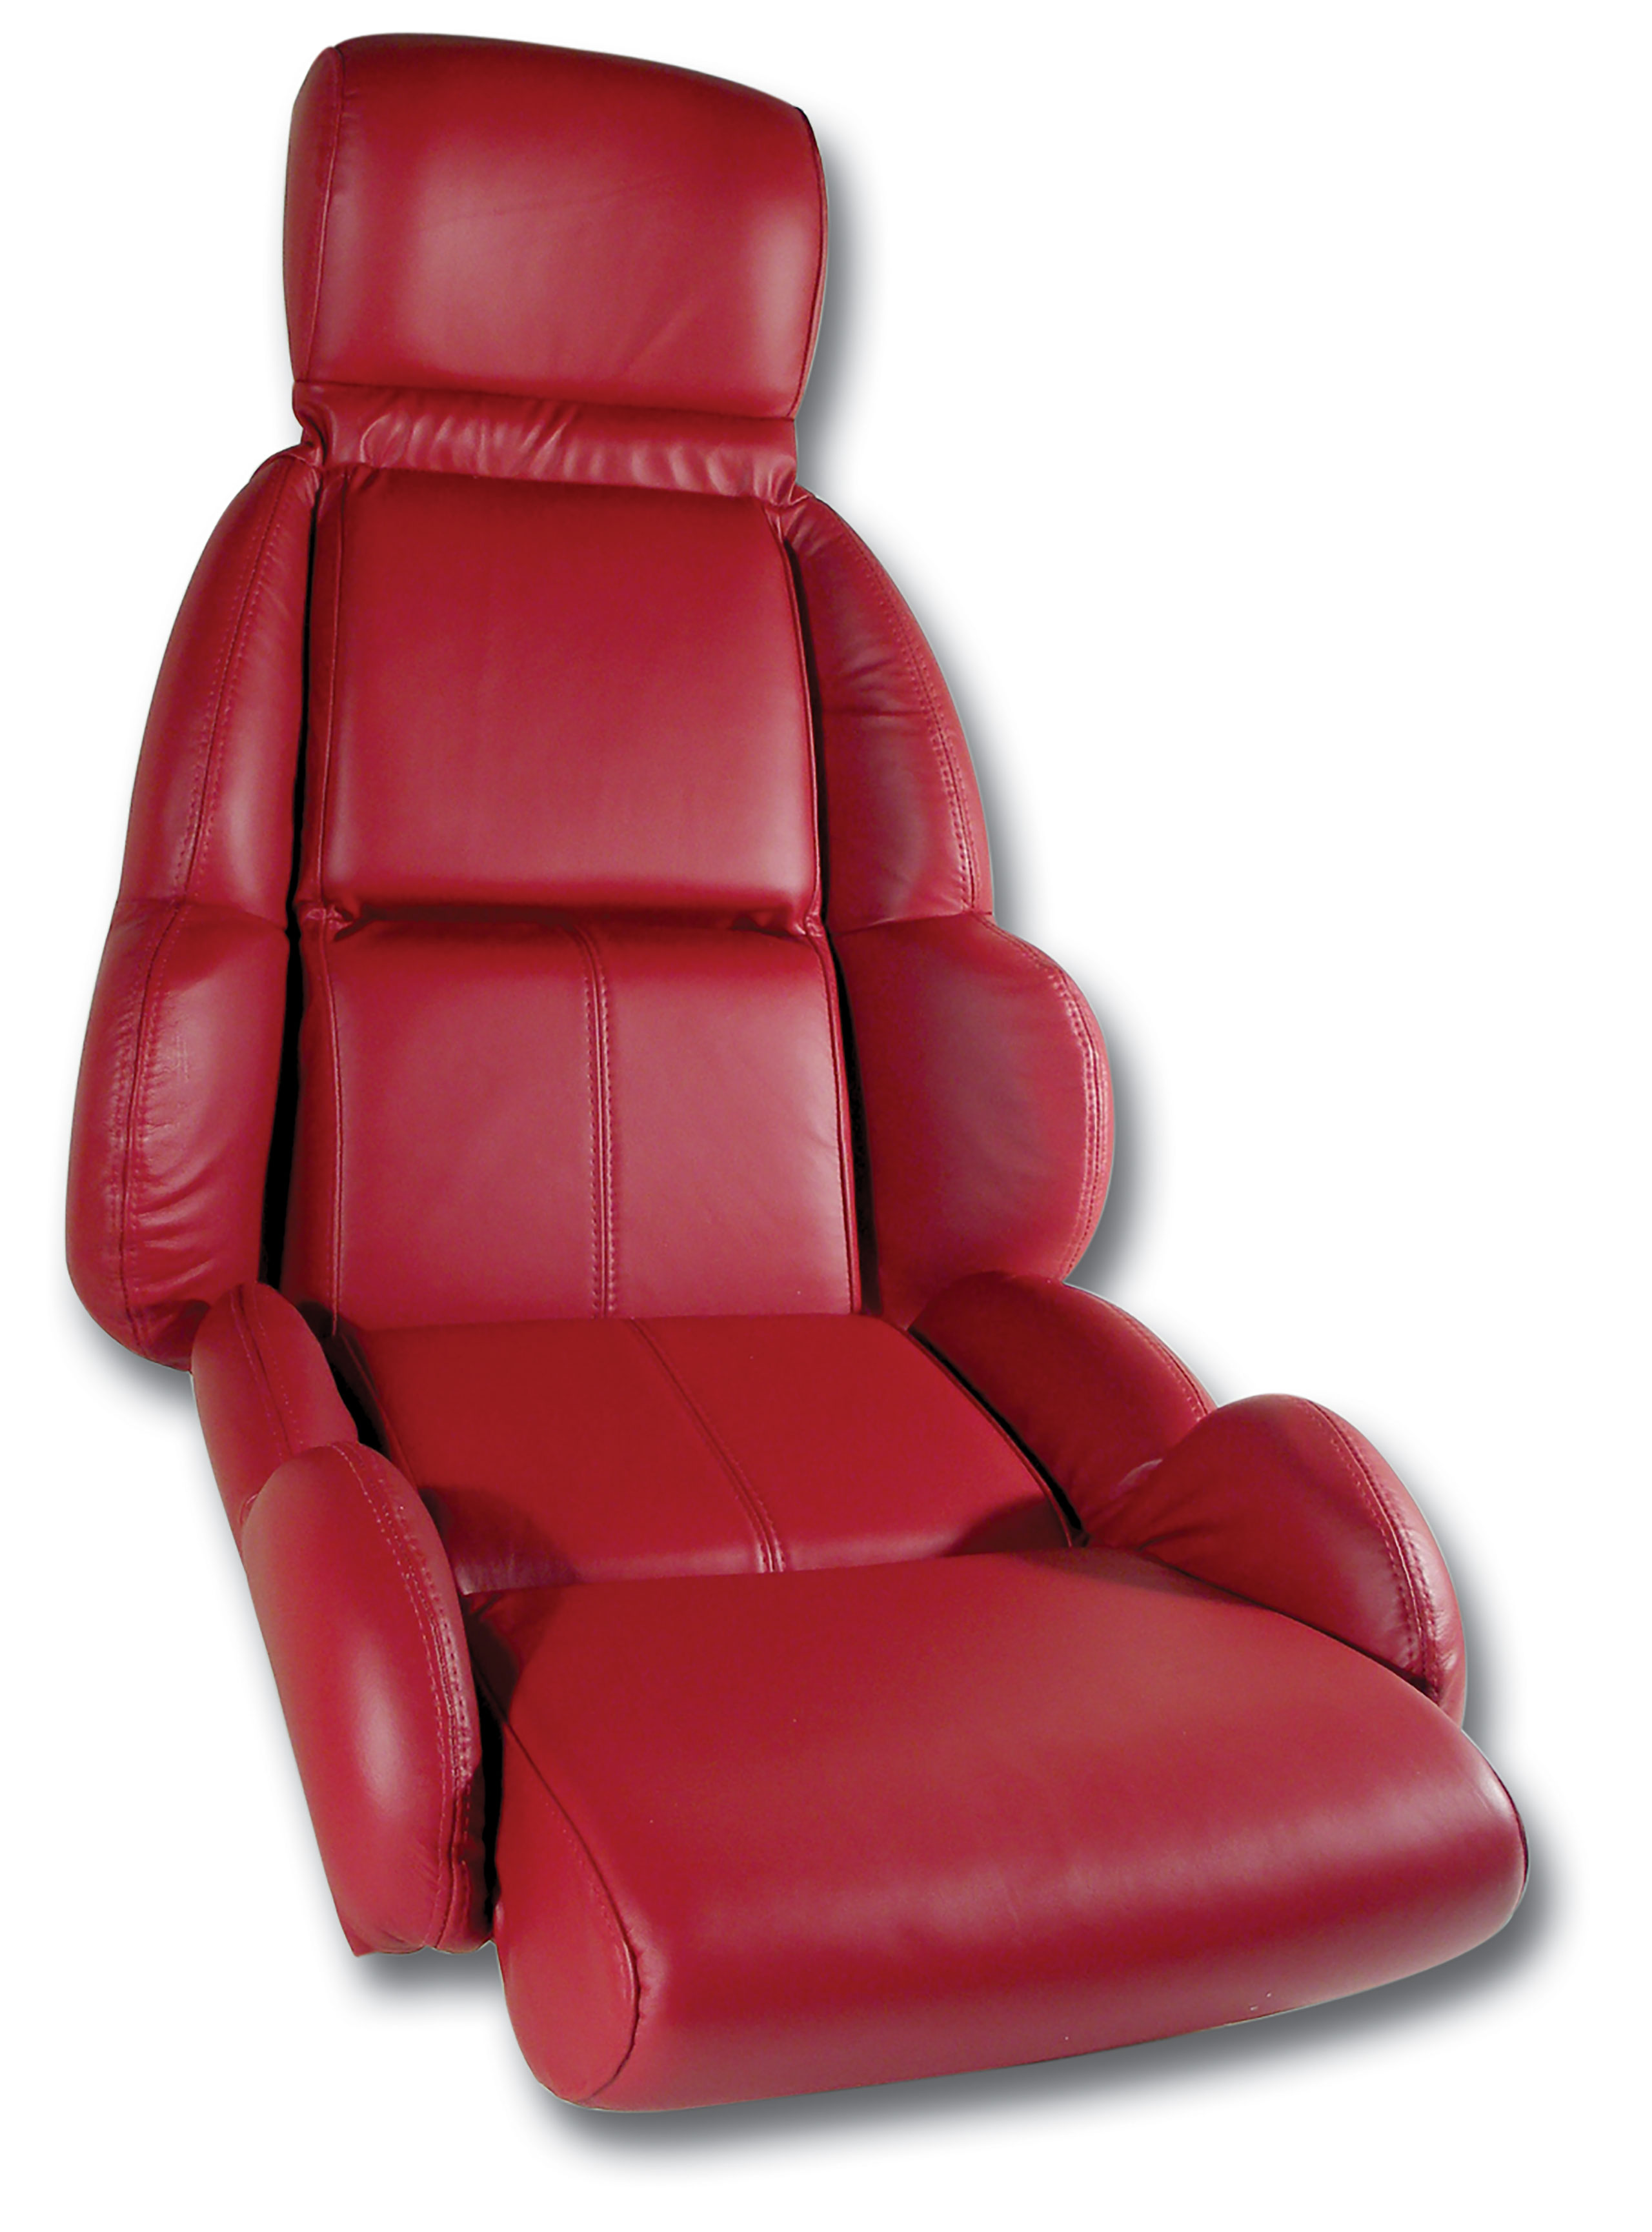 1989-1992 C4 Corvette Mounted Leather Seat Covers Red Standard